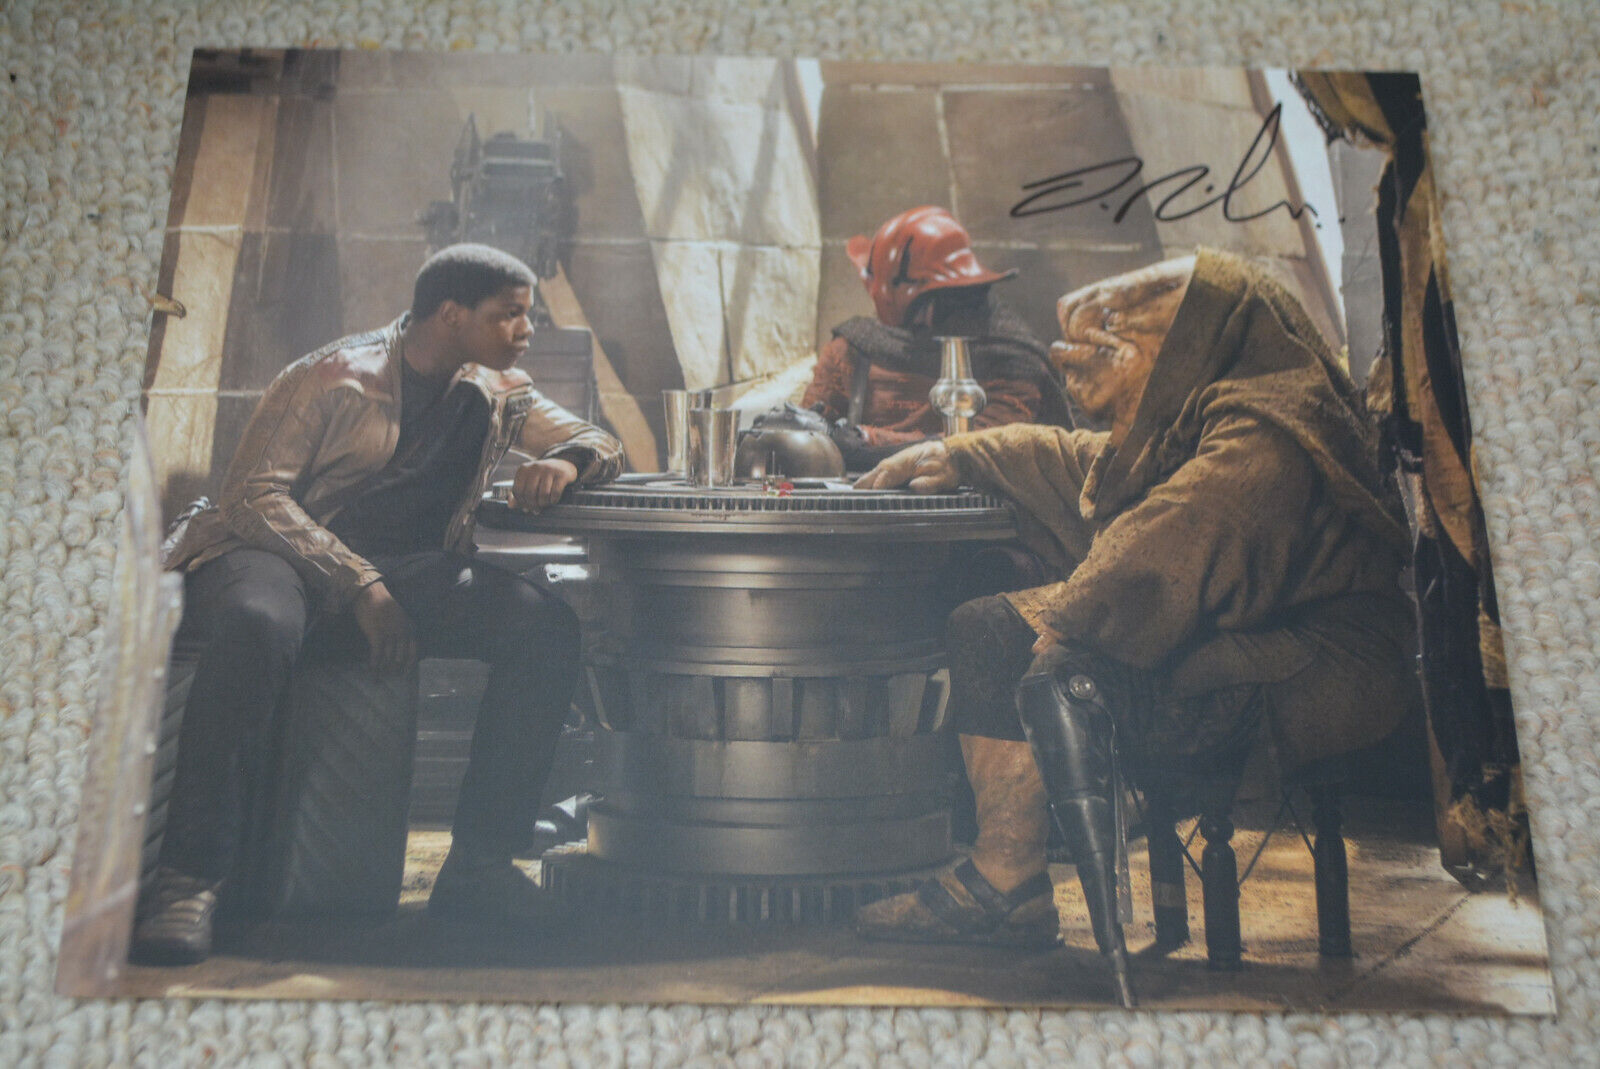 SCOTT RICHARDSON signed autograph In Person 8x10 STAR WARS FORCE AWAKENS